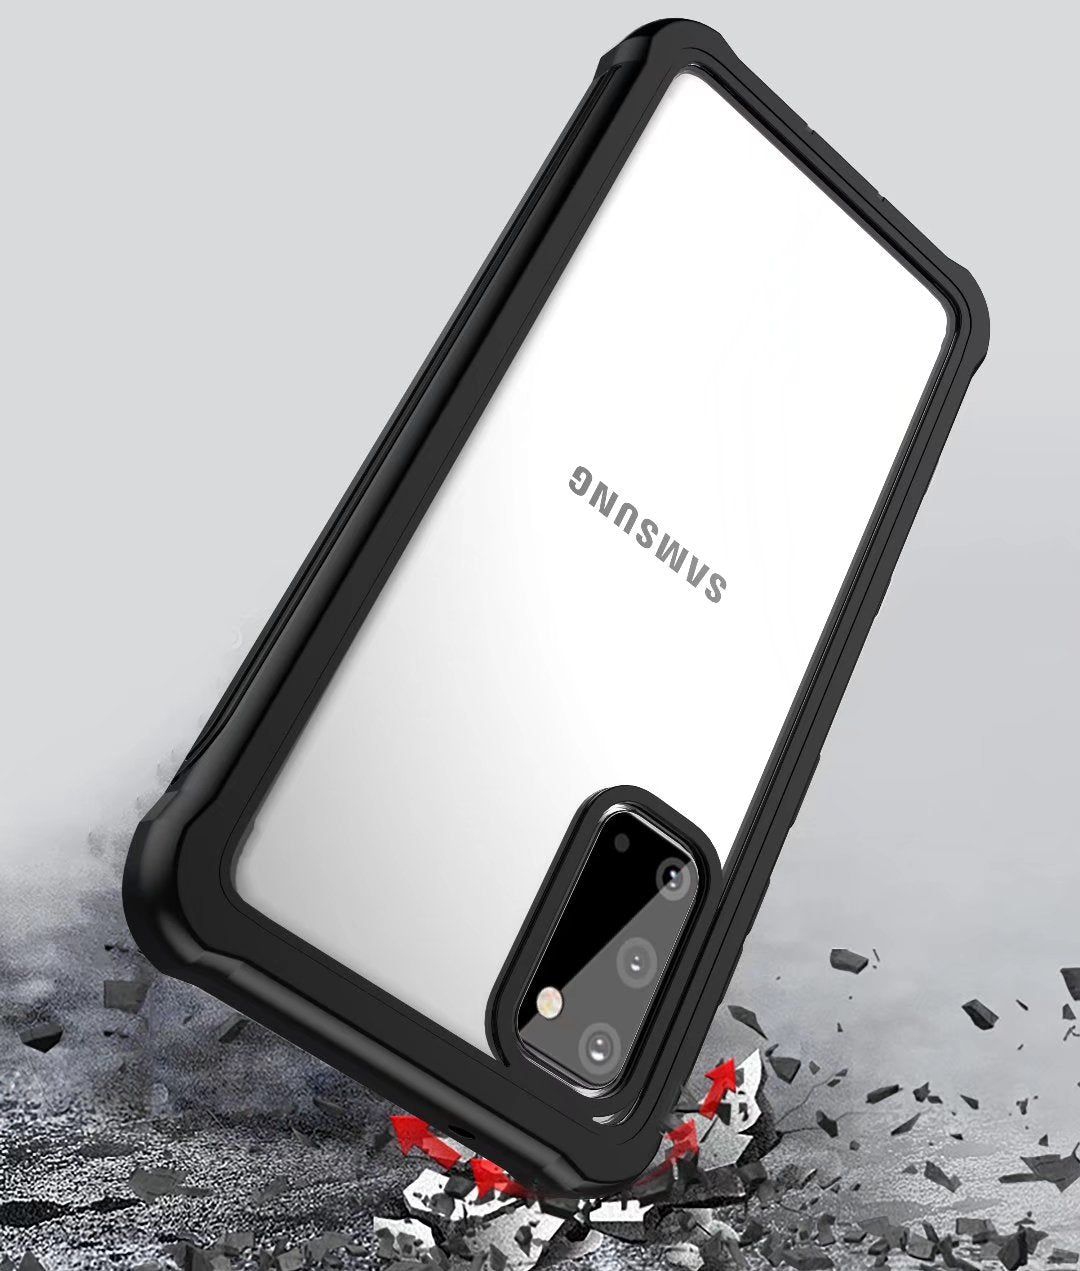 Samsung Galaxy S20 Case Rugged 360 Degree Full Coversage Protection Defense Fall 2 Meters